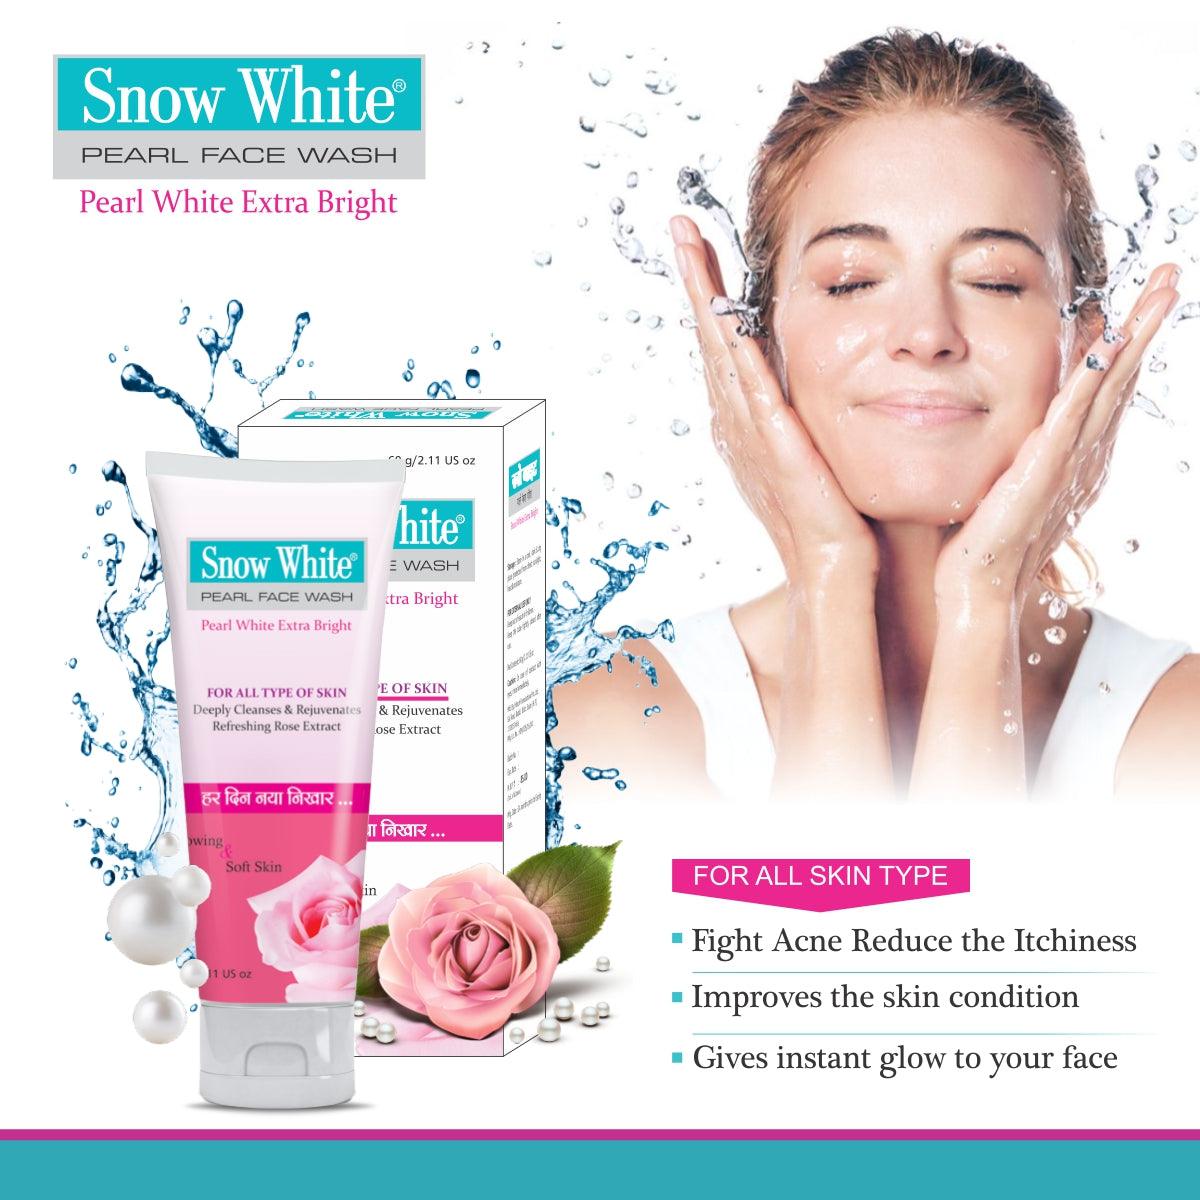 Snow White Cream & Pearl Face Wash and Soap for Acne, Dark Circles, Pimples, Black Spots - Olefia Biopharma Limited